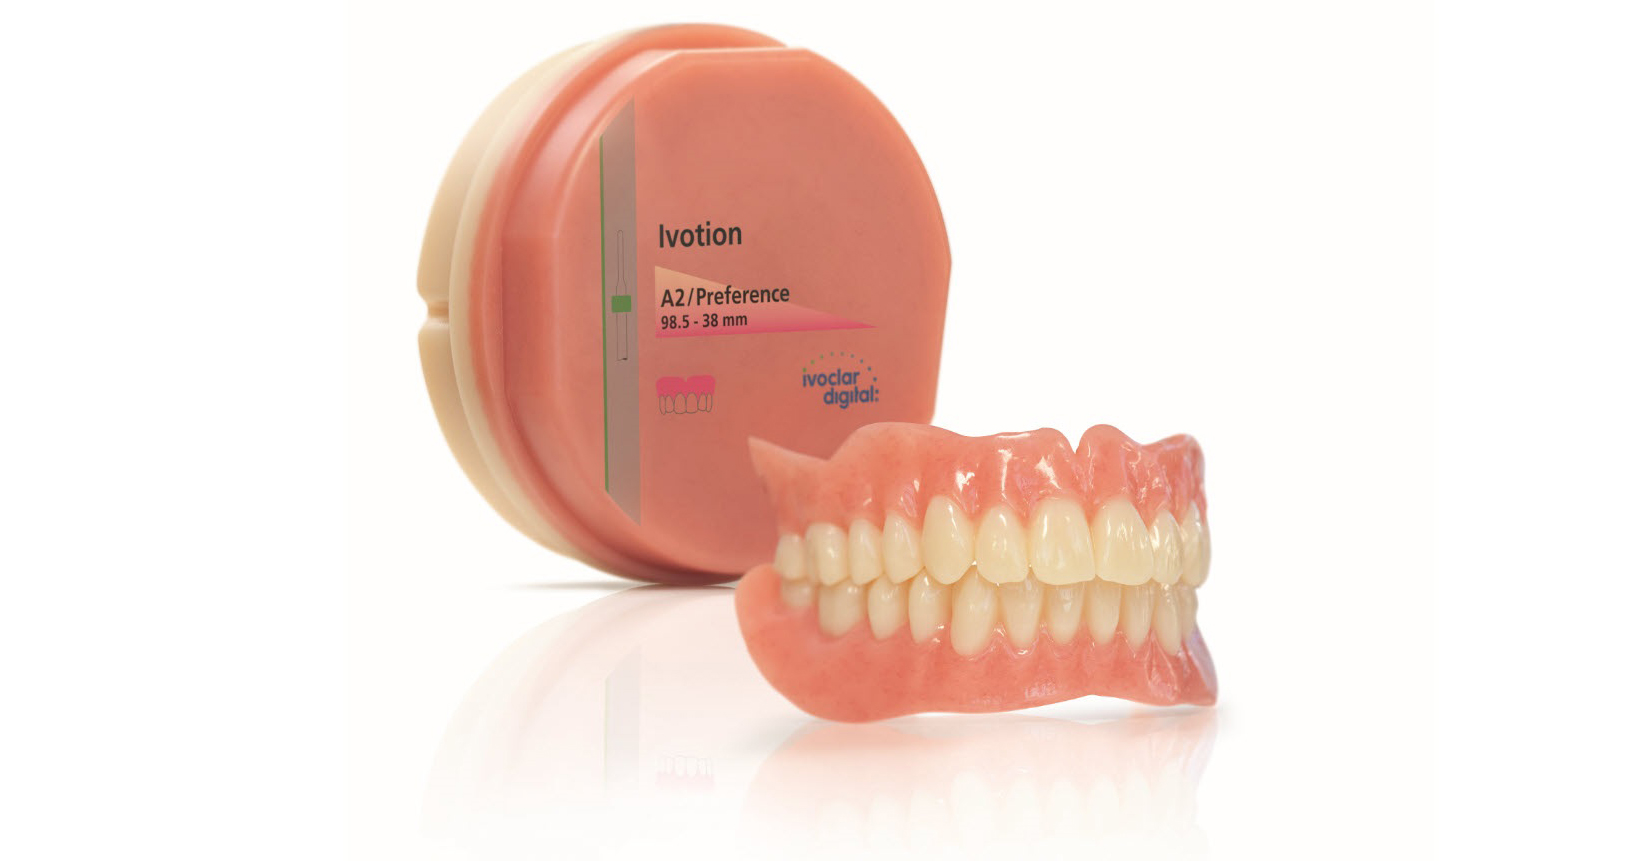 Digital Denture Solutions Takes Center Stage at the 2020 Chicago Midwinter Meeting